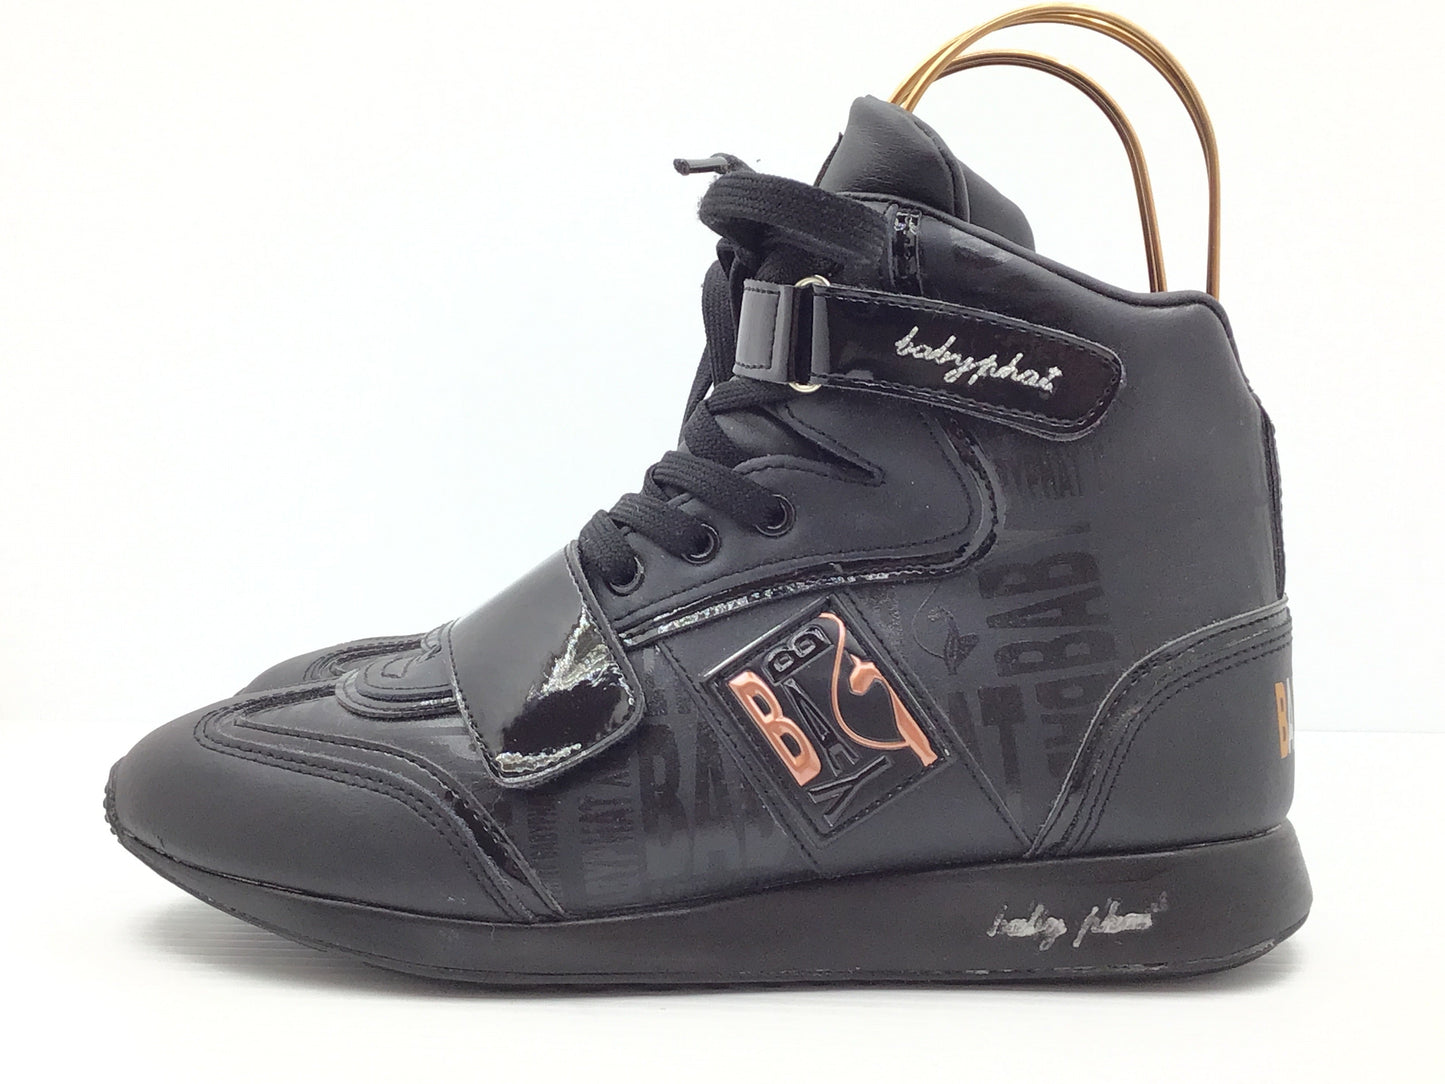 Shoes Sneakers By Baby Phat  Size: 9